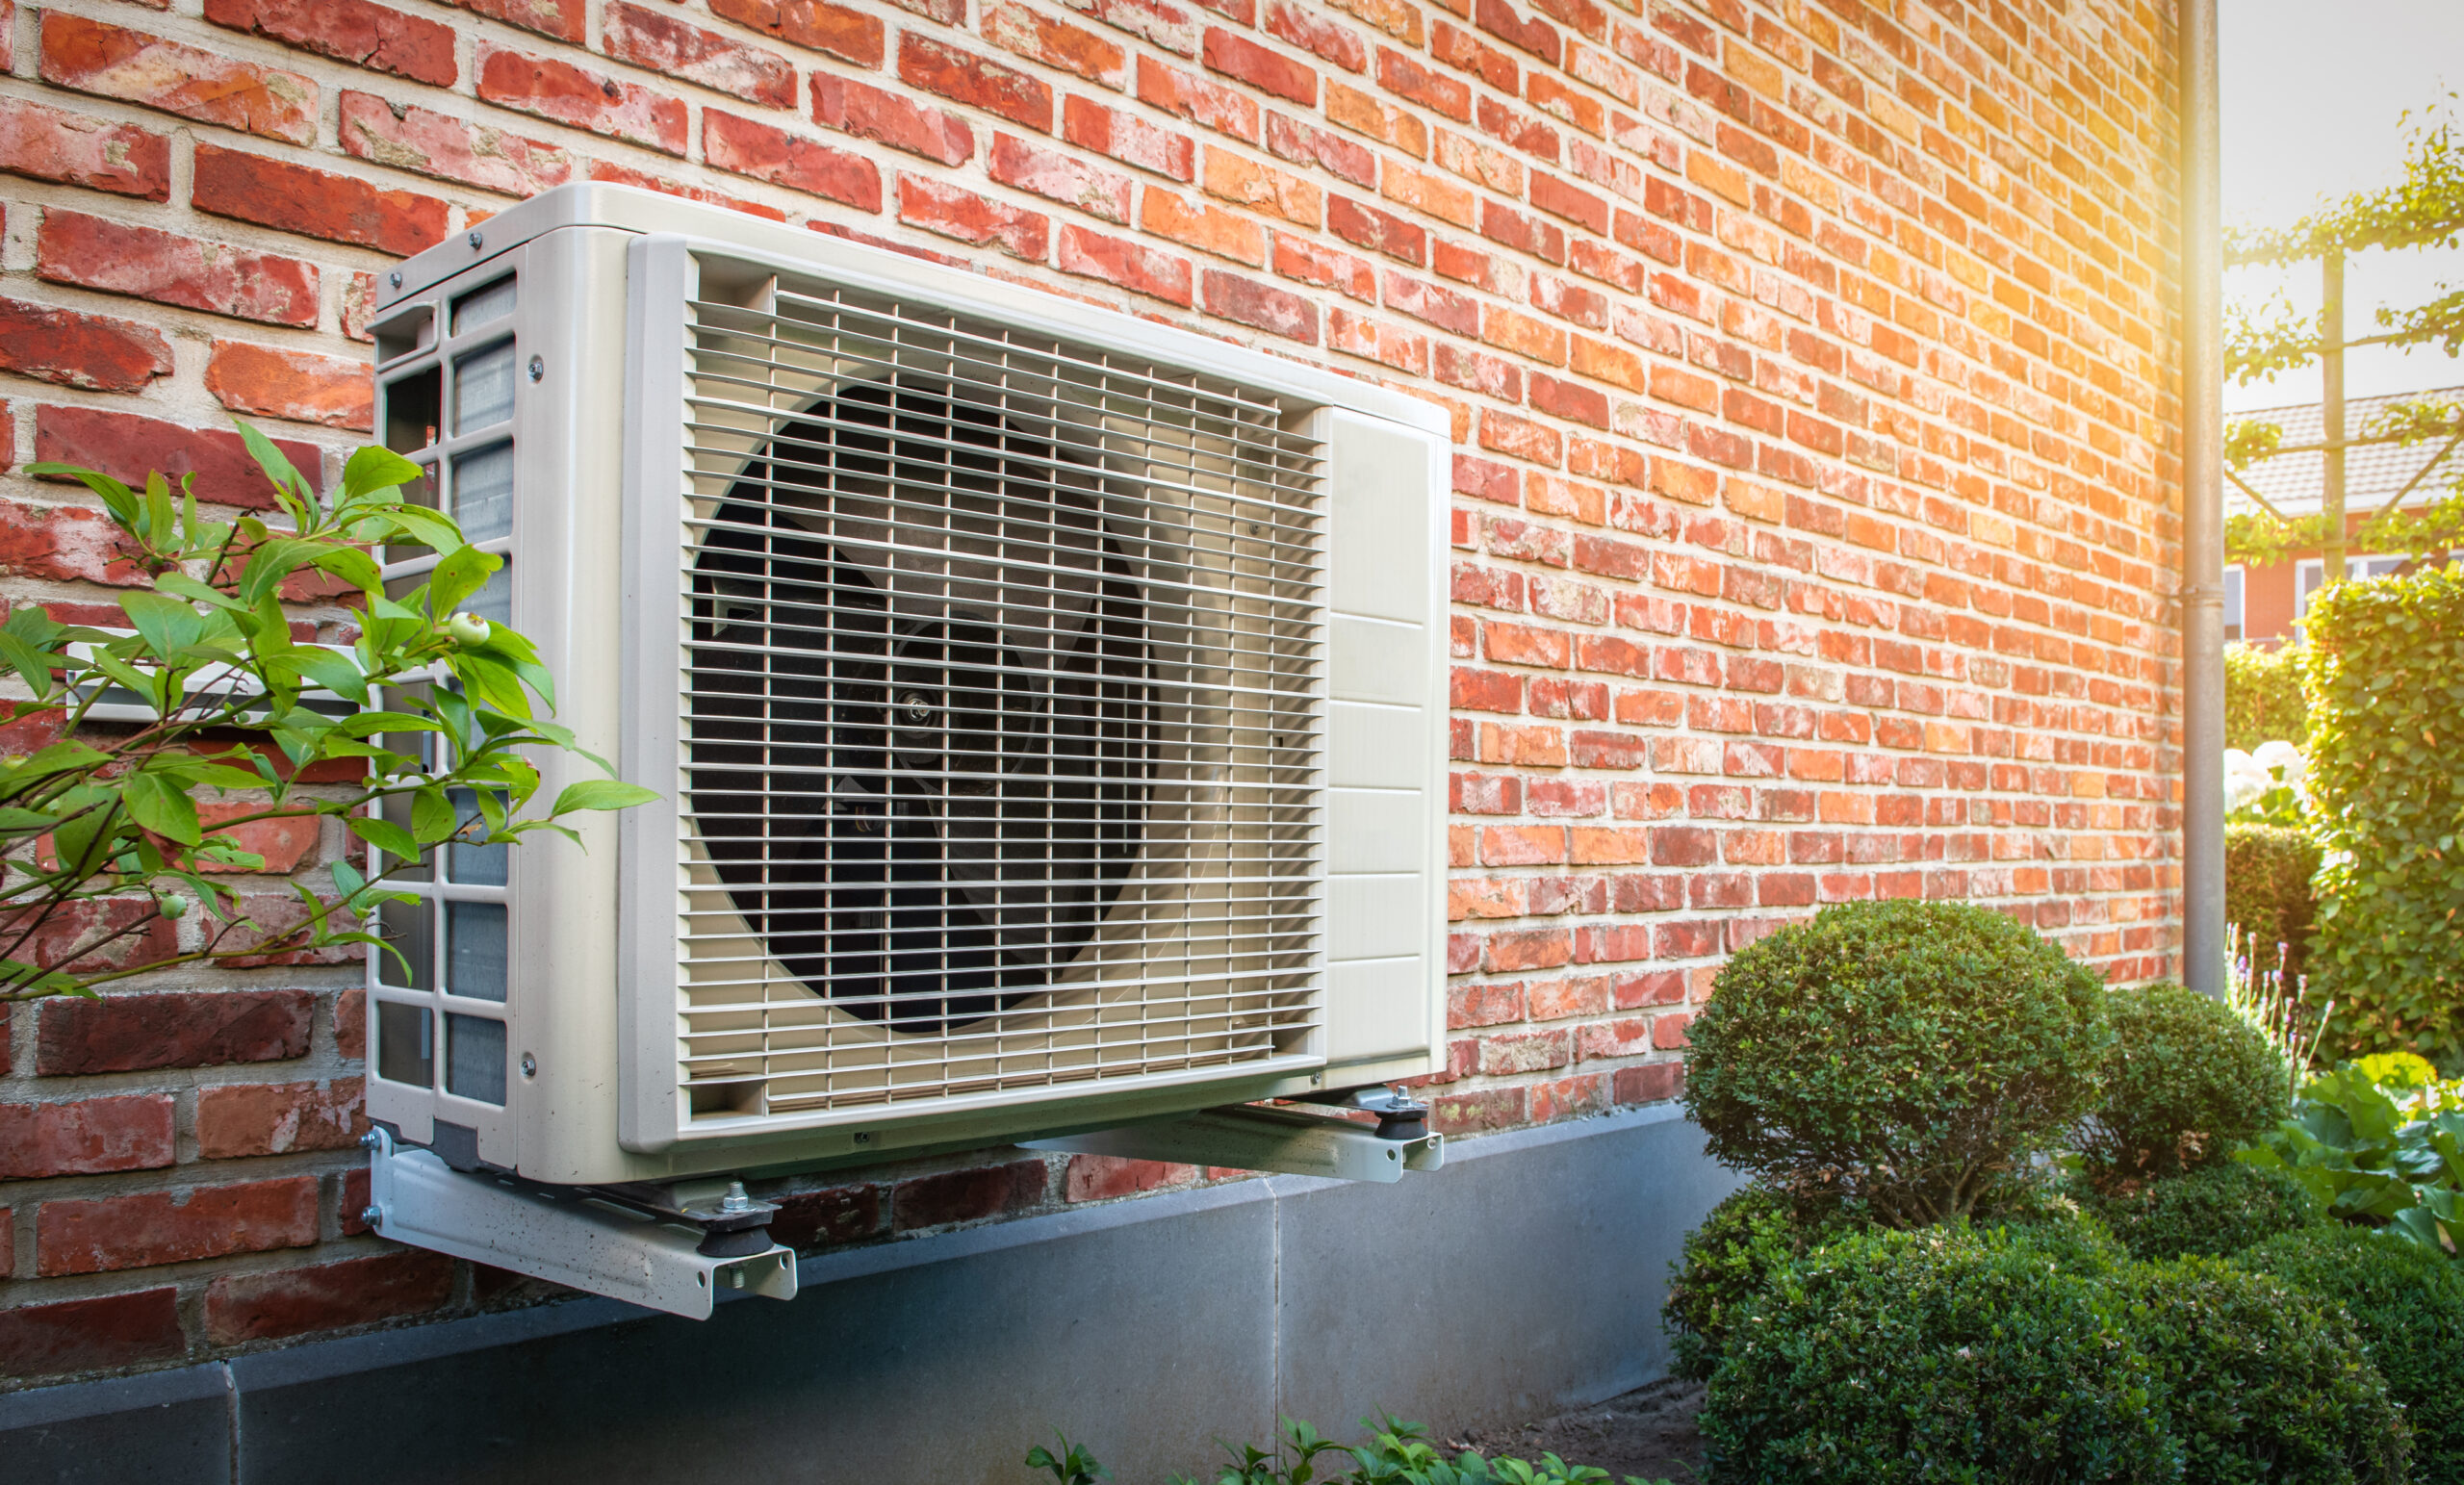 Heat pump mounted on a brick wall of a home